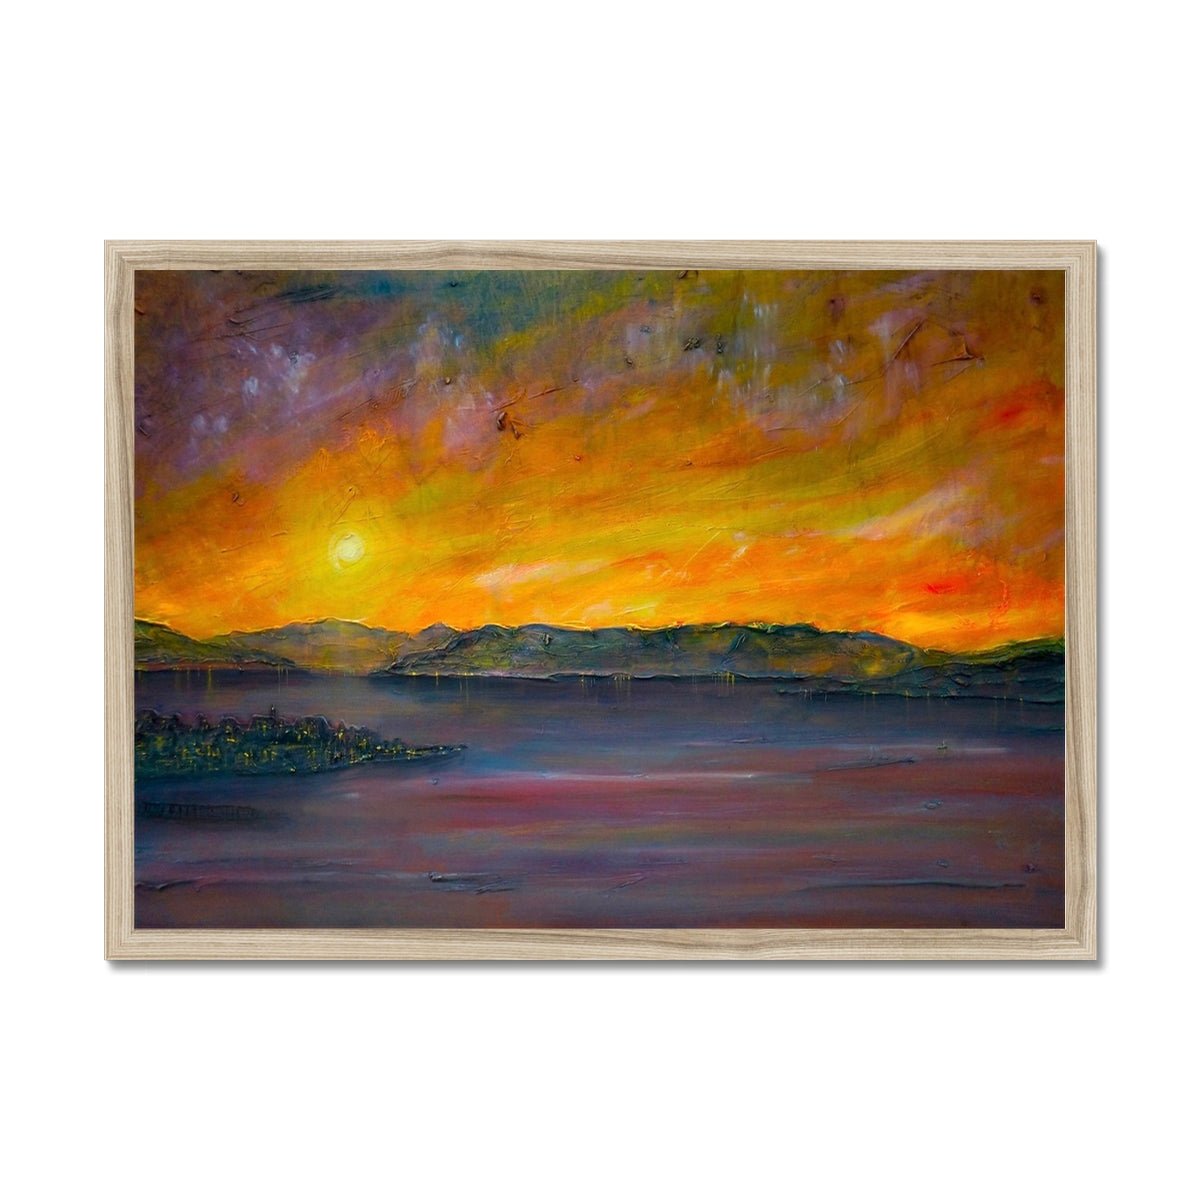 Sunset Over Gourock Painting | Framed Prints From Scotland-Framed Prints-River Clyde Art Gallery-A2 Landscape-Natural Frame-Paintings, Prints, Homeware, Art Gifts From Scotland By Scottish Artist Kevin Hunter